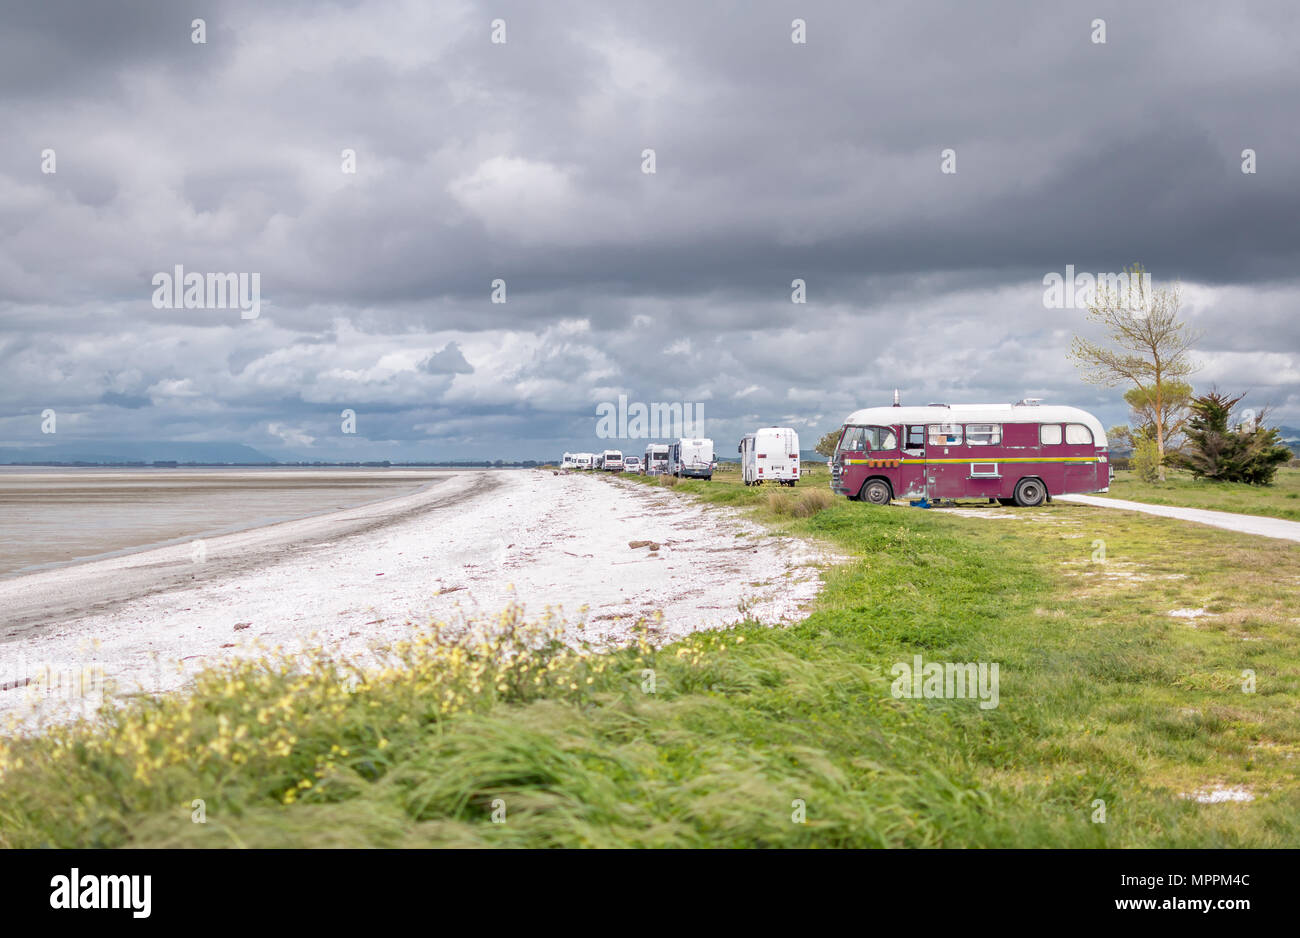 Bus and campervans on the beach front Stock Photo